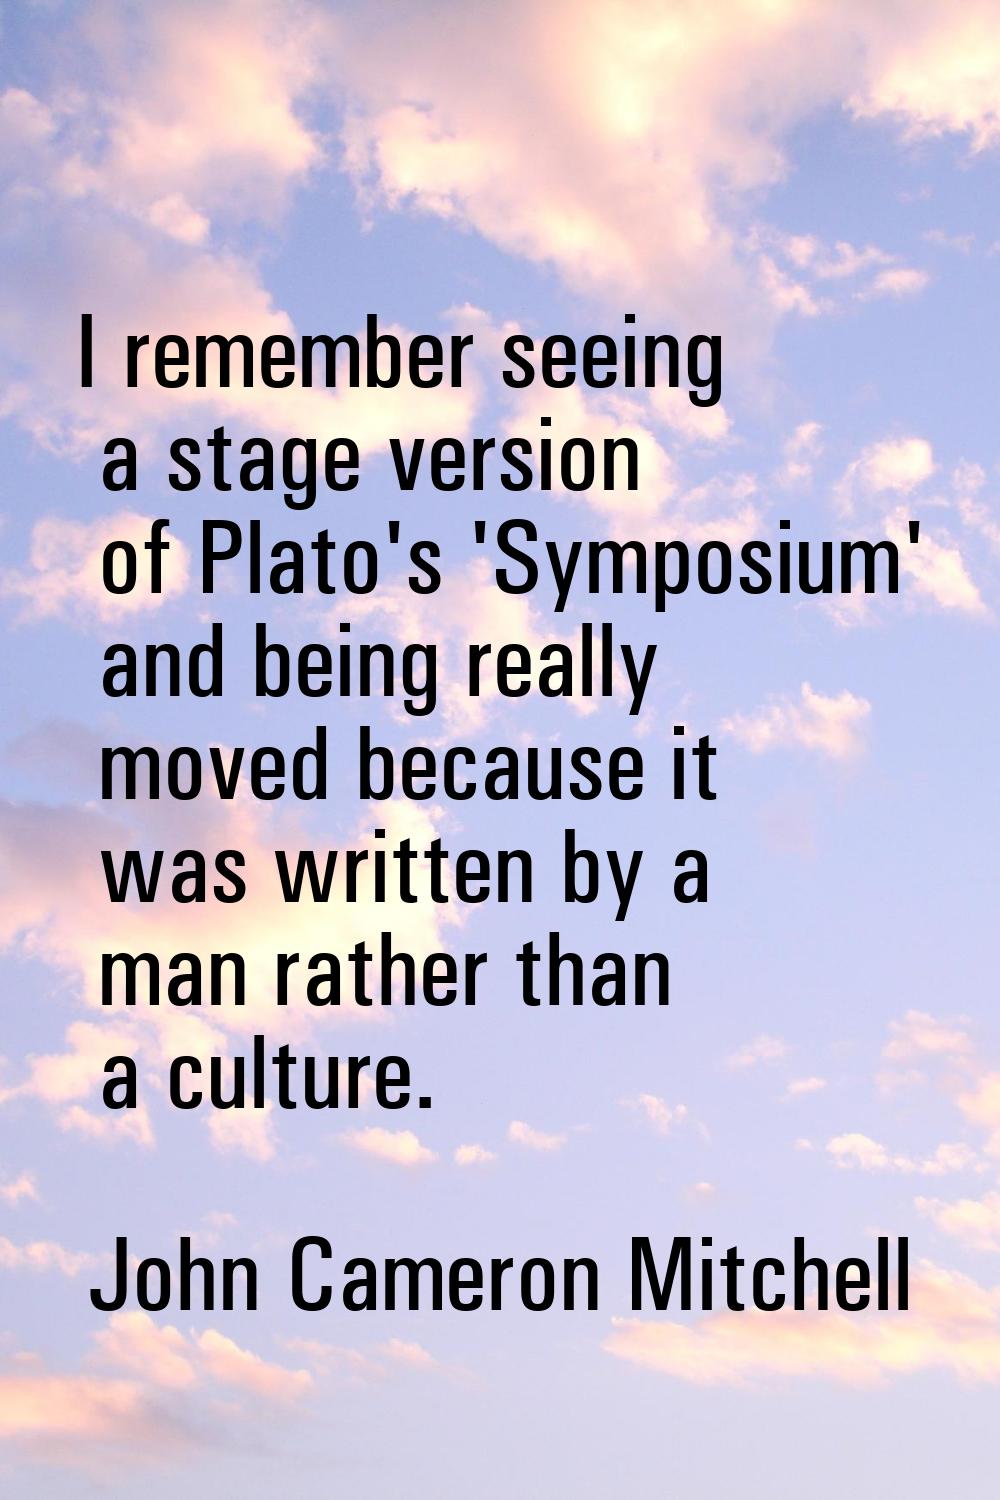 I remember seeing a stage version of Plato's 'Symposium' and being really moved because it was writ